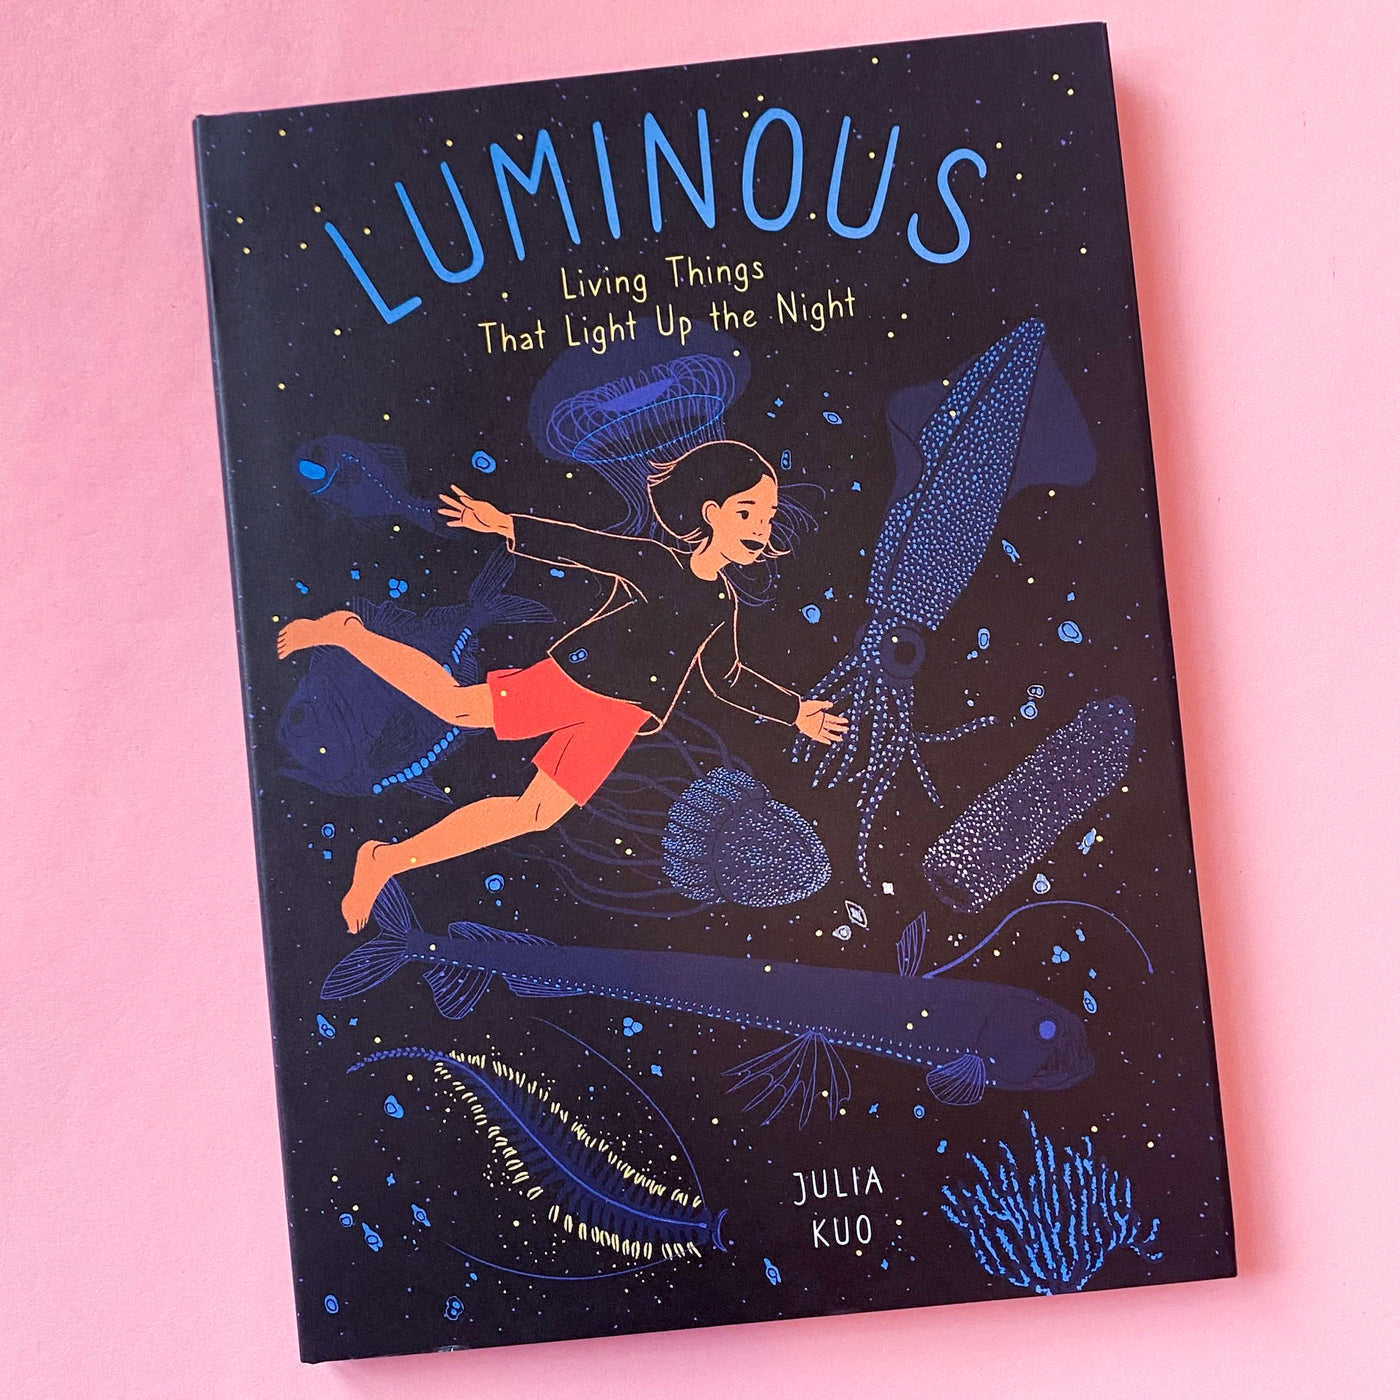 Luminous: Living Things That Light Up the Night by Julia Kuo